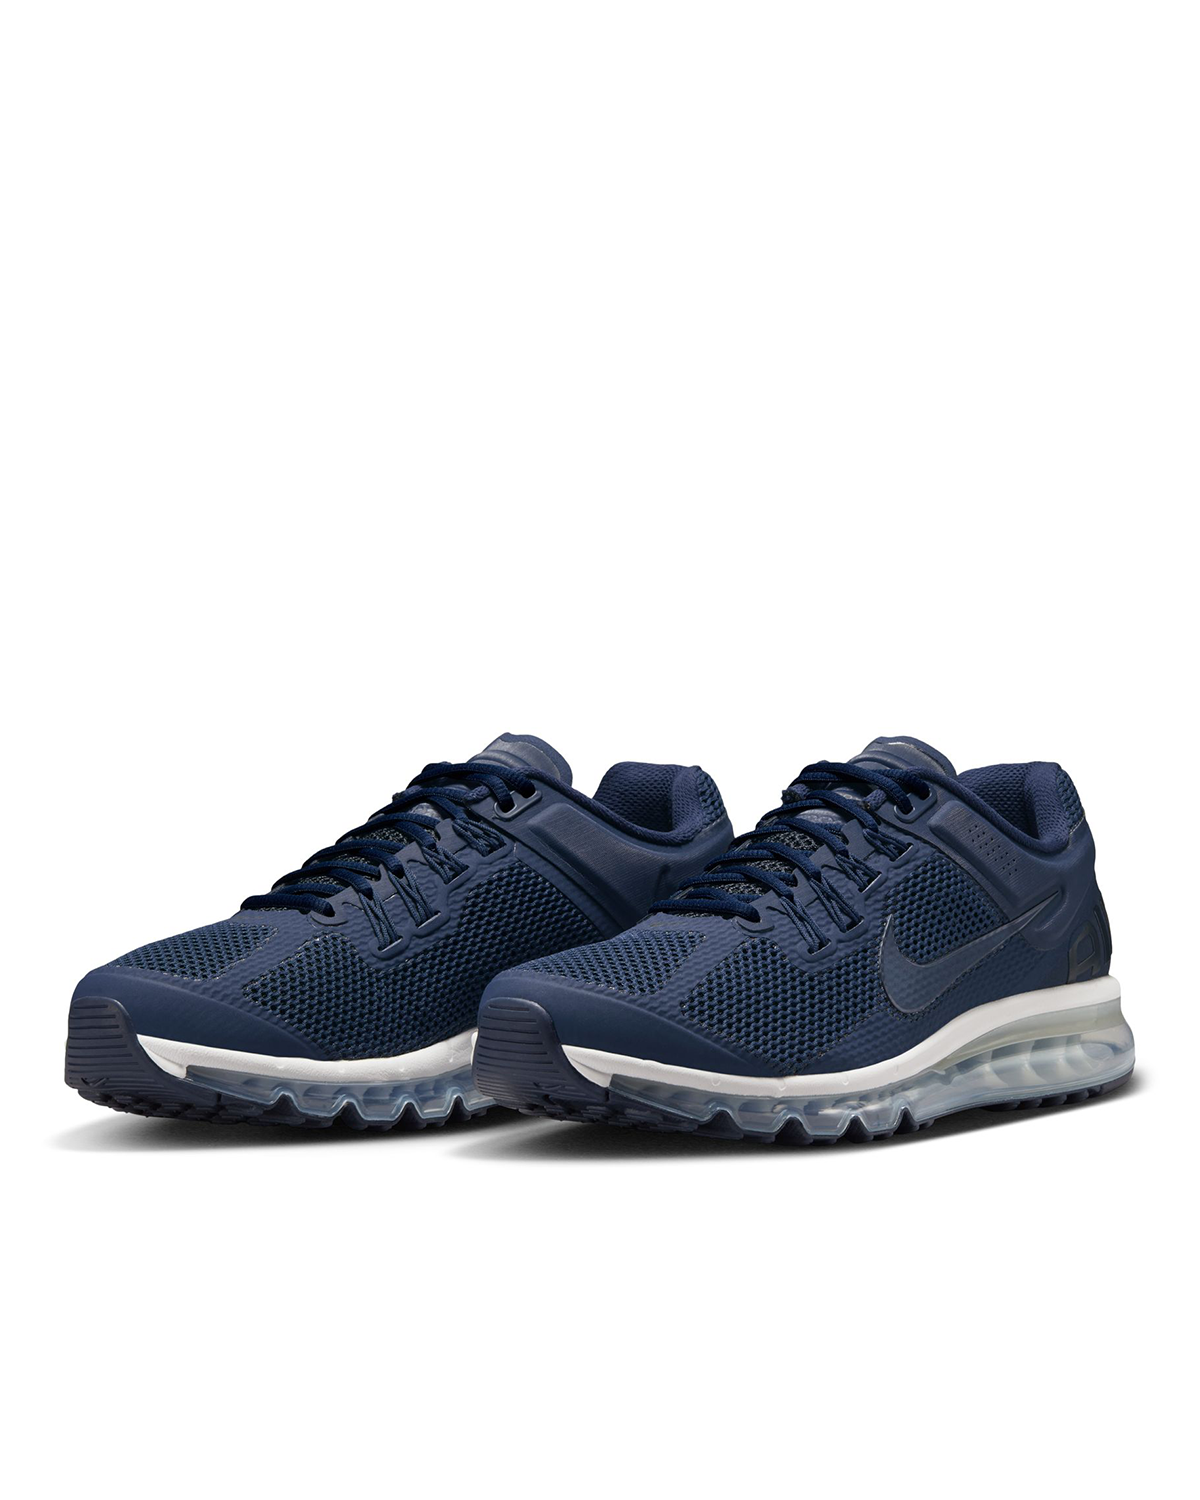 Air Max 2013 'College Navy'